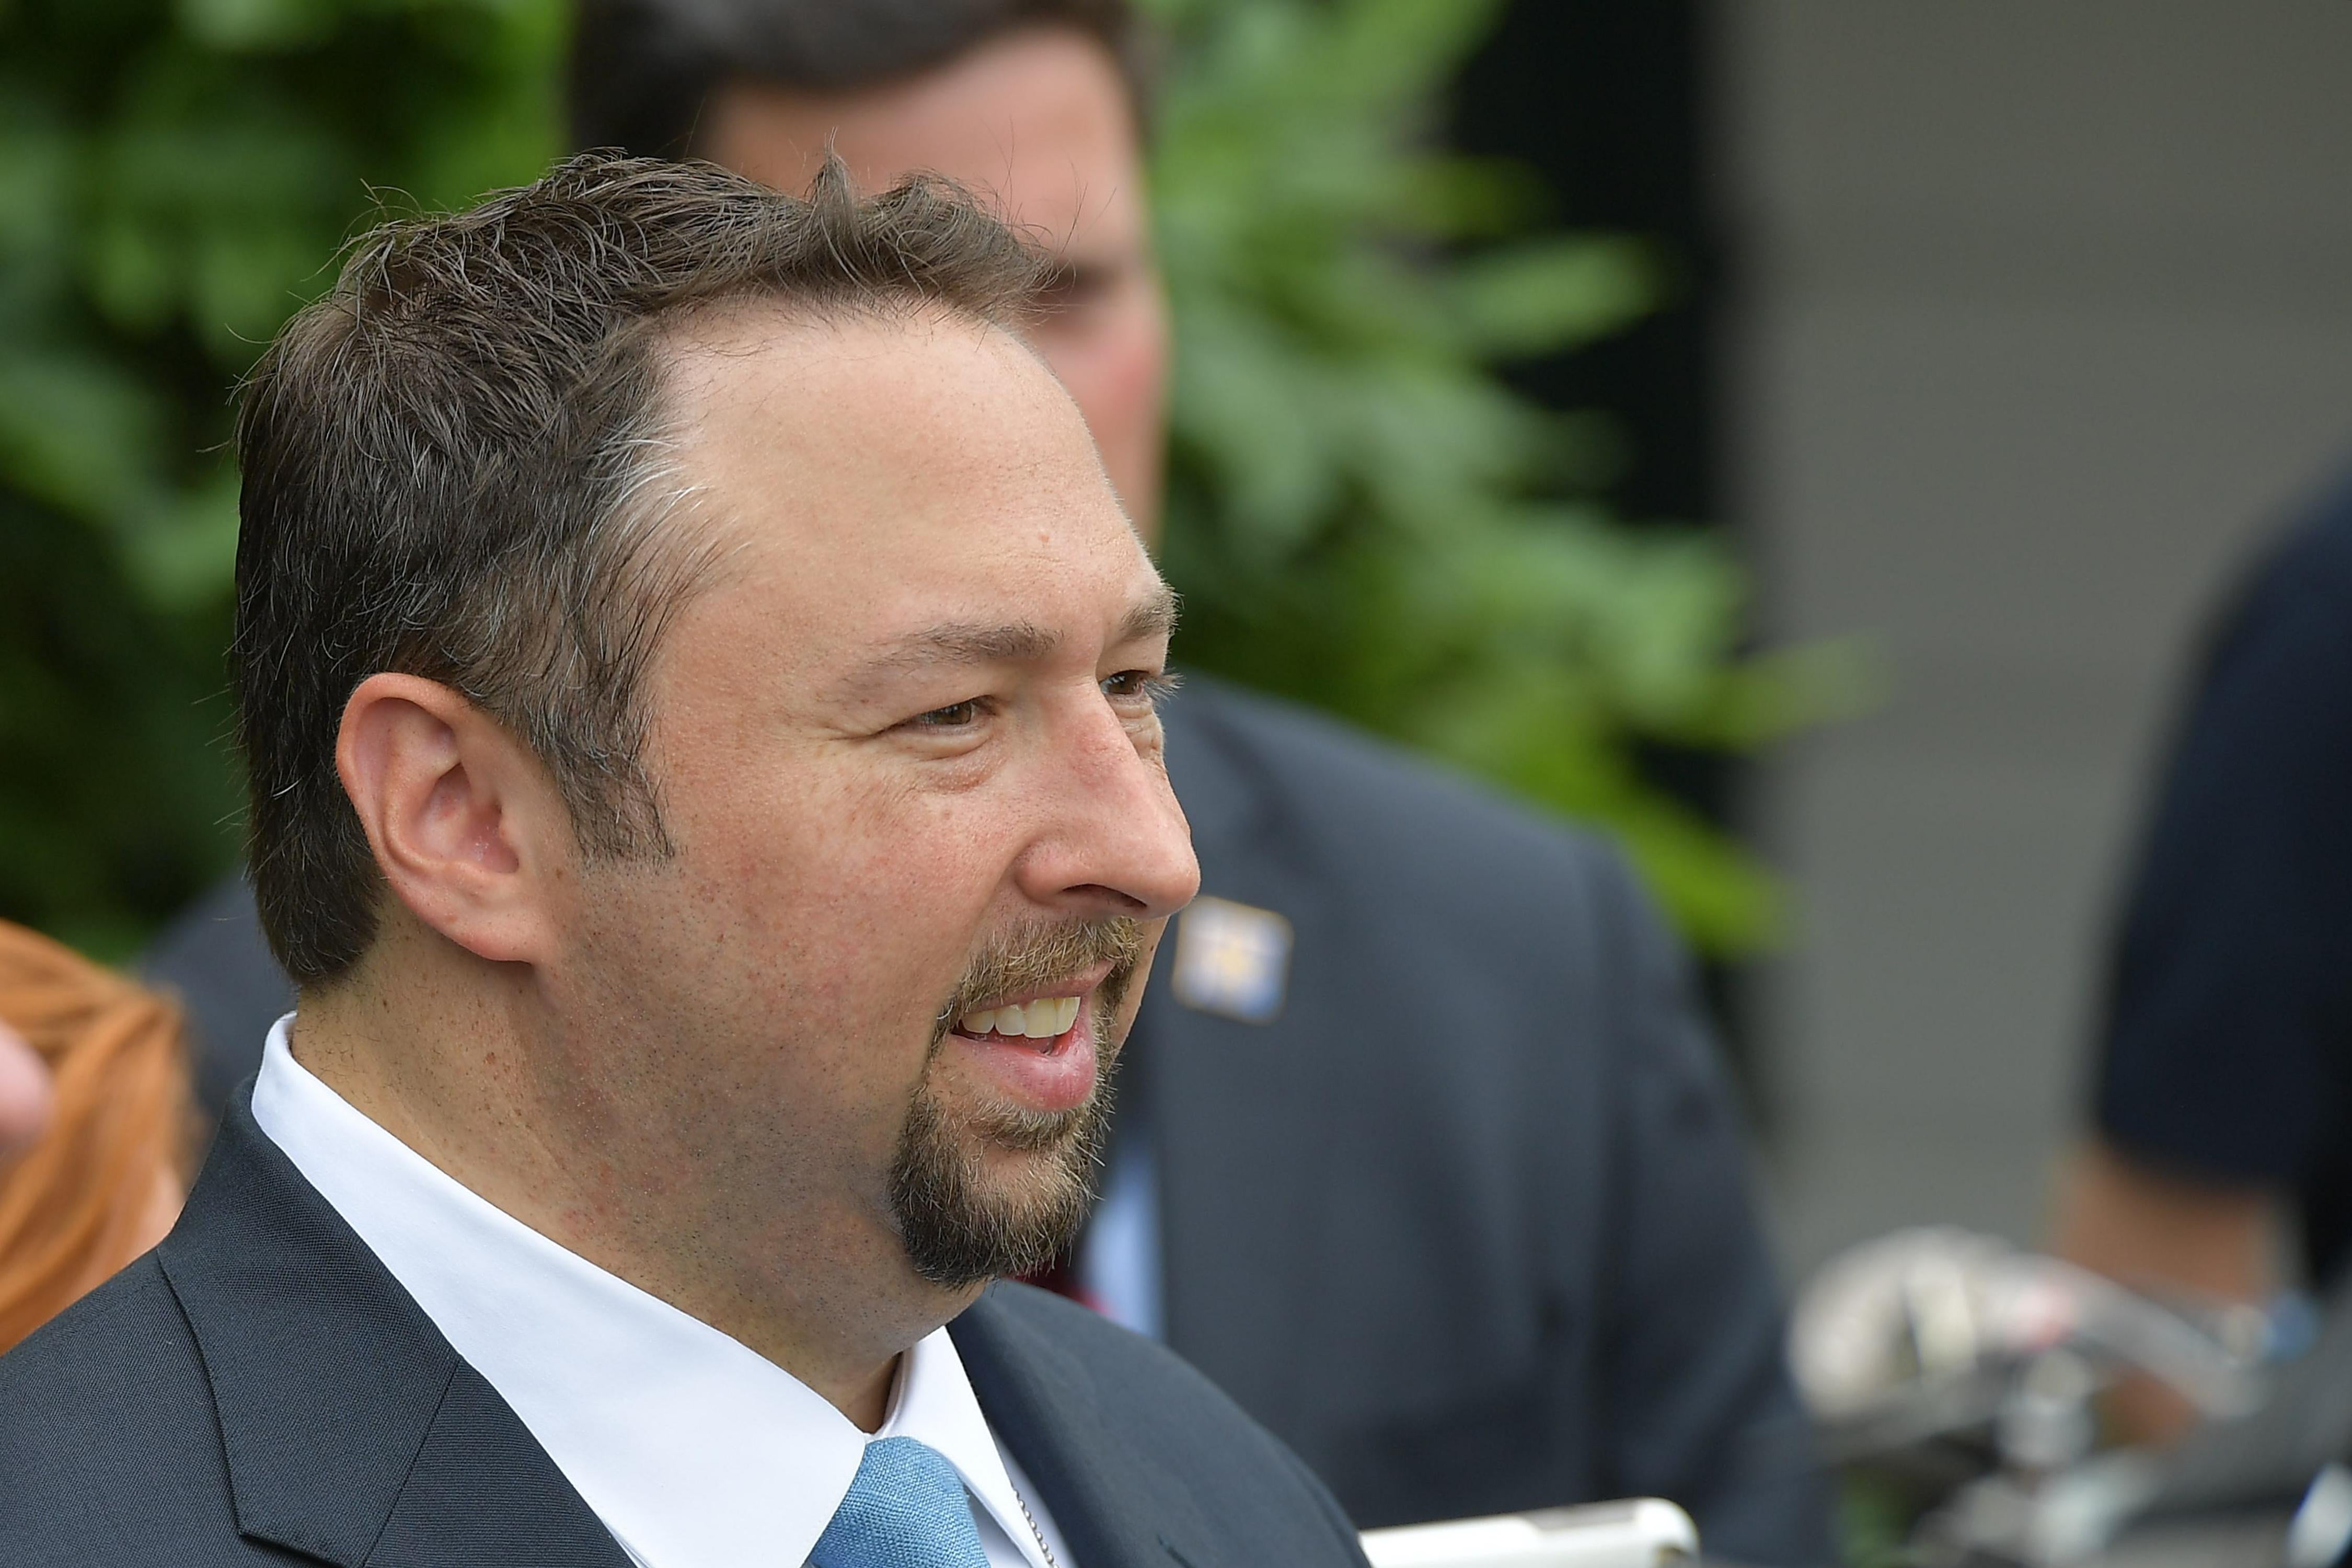 Former Trump campaign spokesman Jason Miller waits for the departure of President Donald Trump on Marine One from the South Lawn of the White House on June 17, 2017 in Washington, D.C.